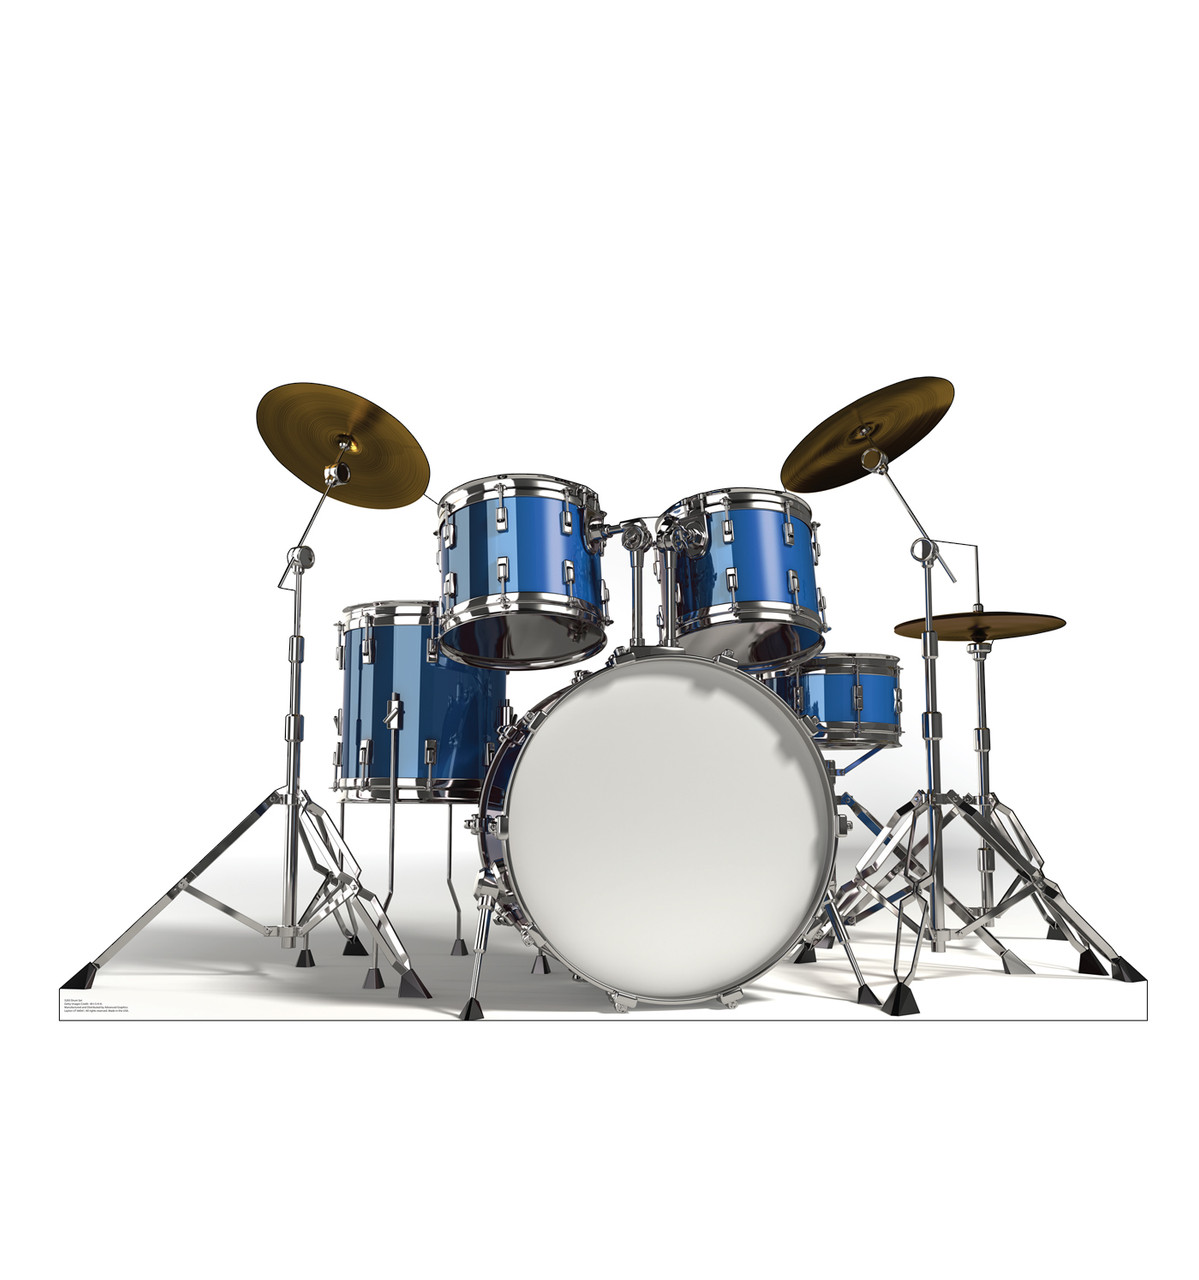 Life-size cardboard standee of a Drum Set.